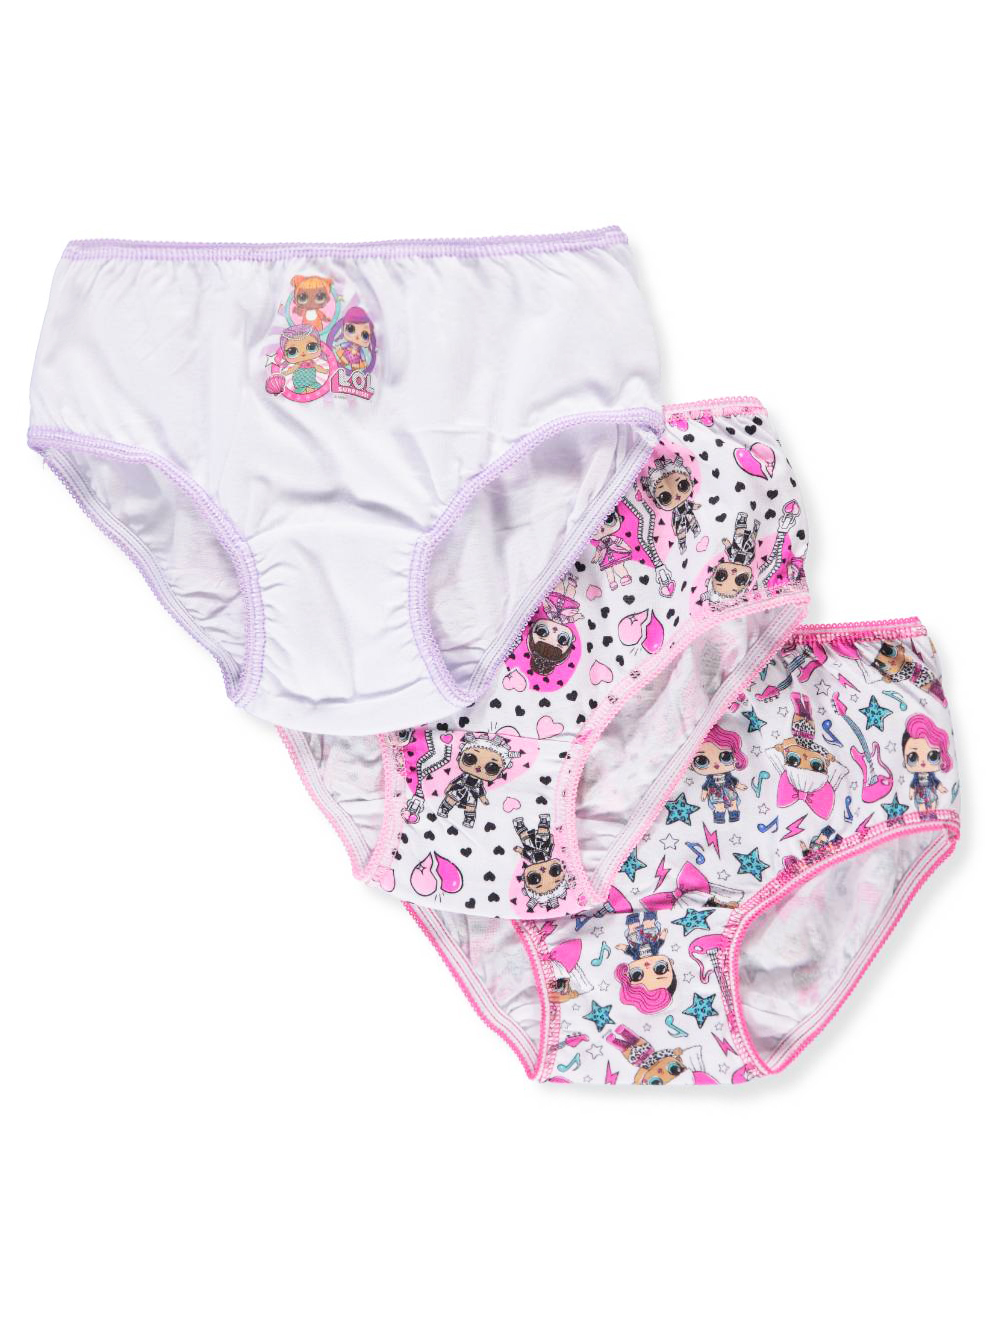 Girls Pink and Multicolor Underwear